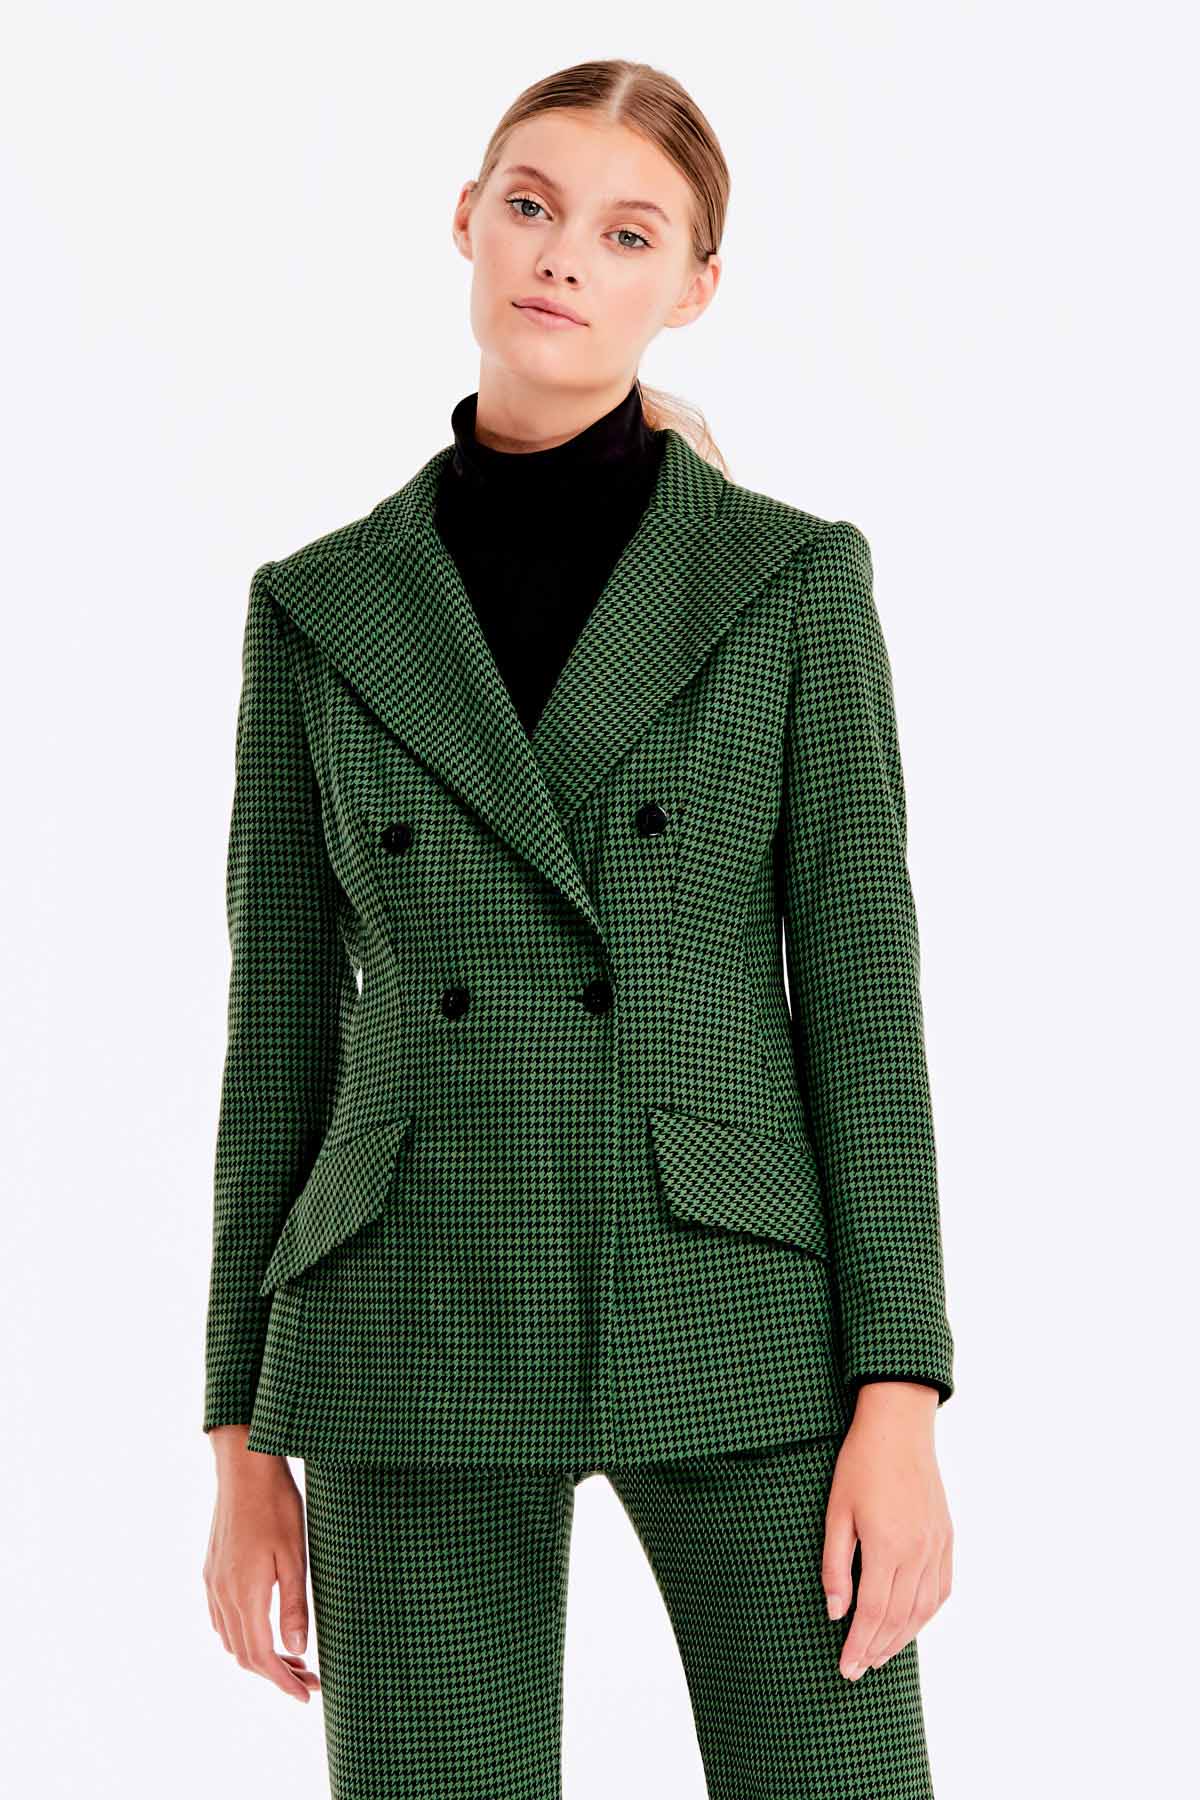 Double-breasted green jacket with a houndstooth print and pockets, photo 6